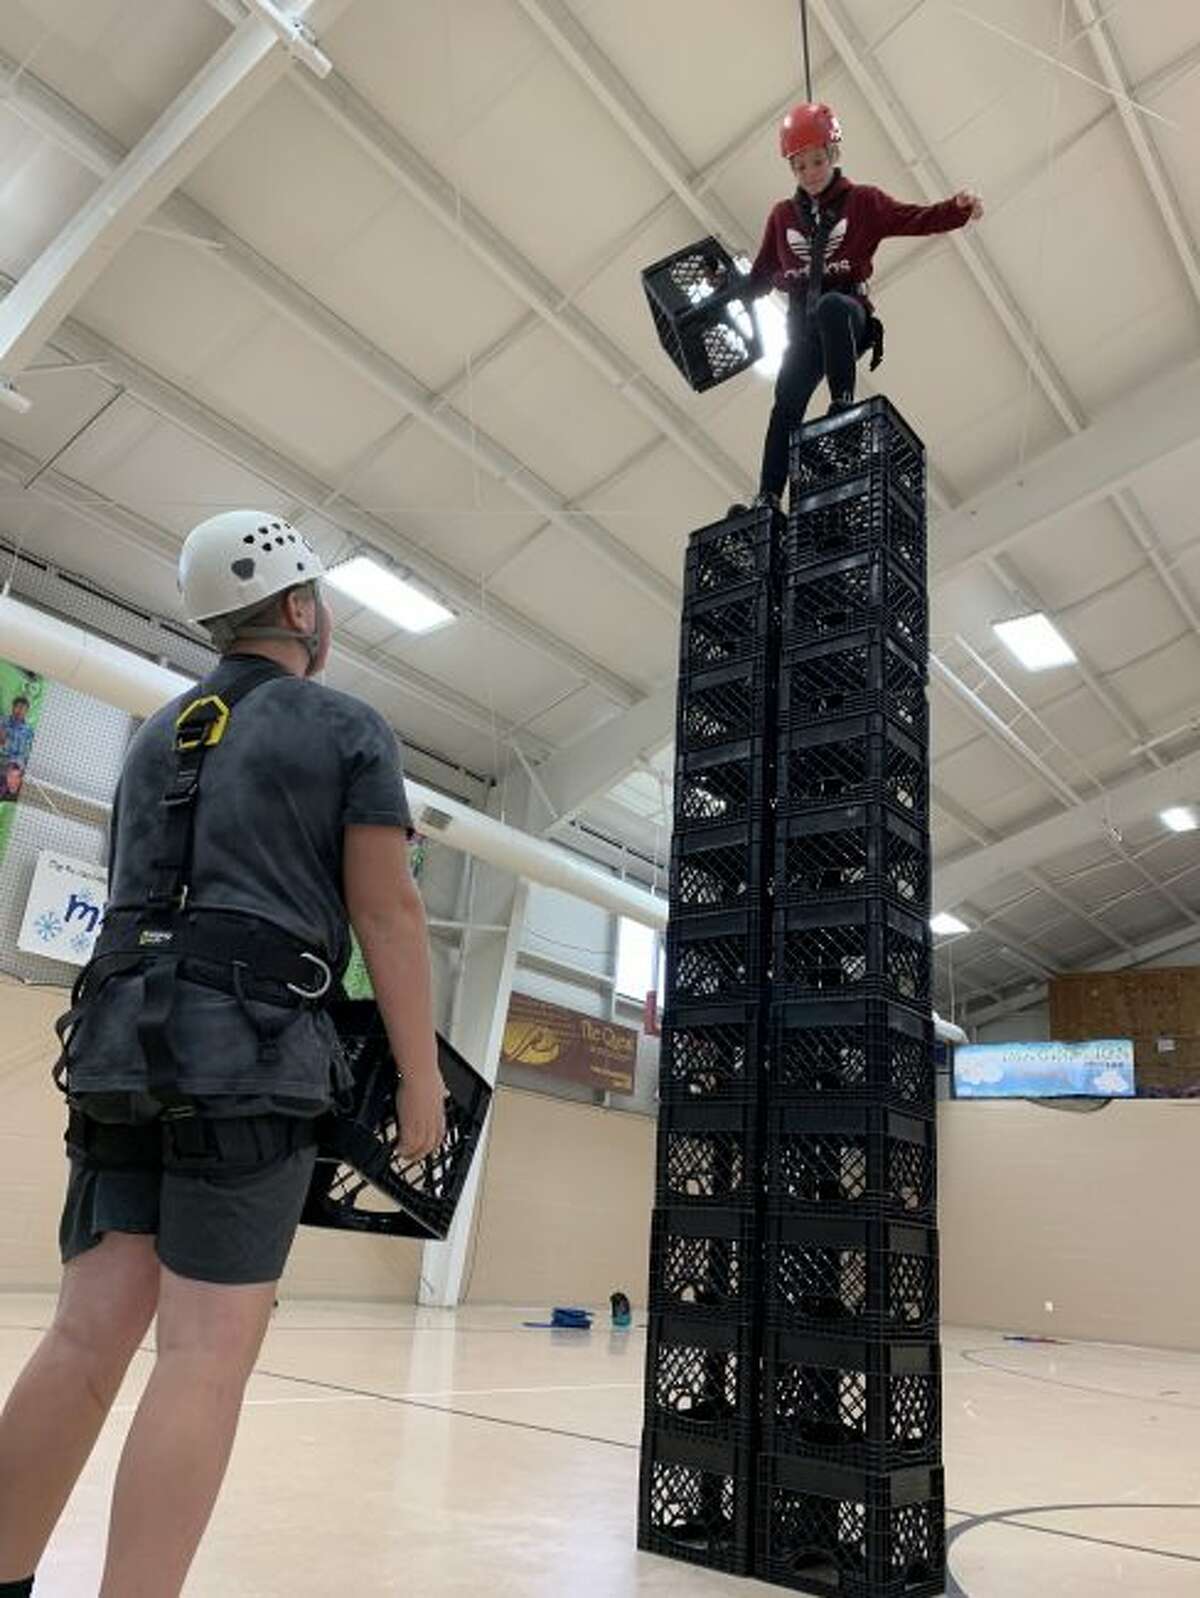 Nate Corey participates in the crate stacking challenge, as he is supported and encouraged by his classmate Adam Domres.